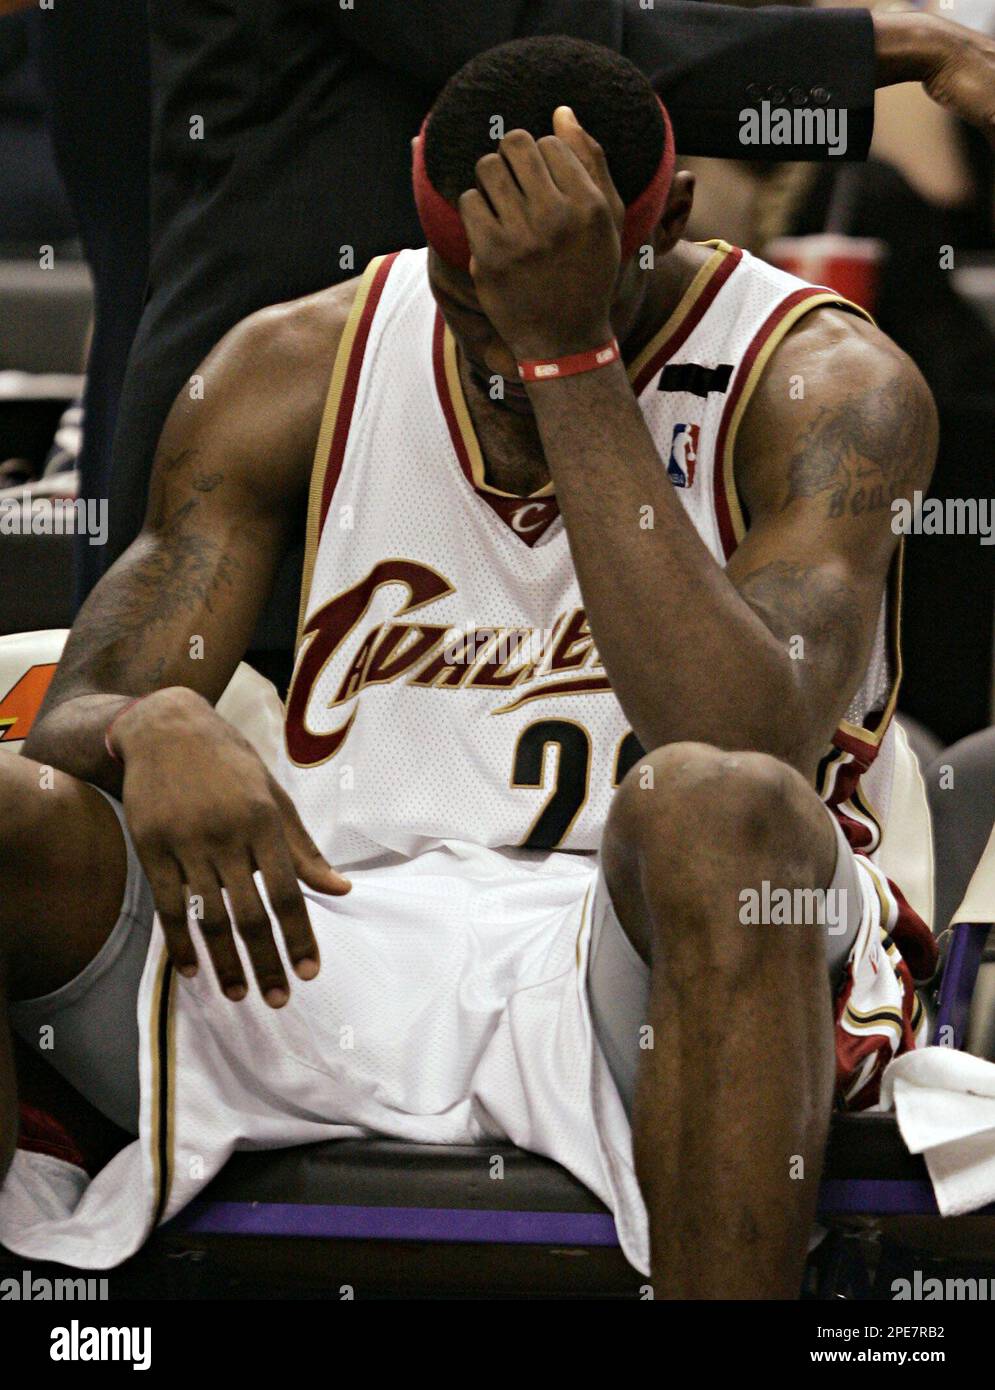 Cleveland Cavaliers' LeBron James sits on the bench in the fourth quarter  during their 104-95 win over the Toronto Raptors in NBA action in Toronto,  Wednesday April 20, 2005. The Cavaliers were